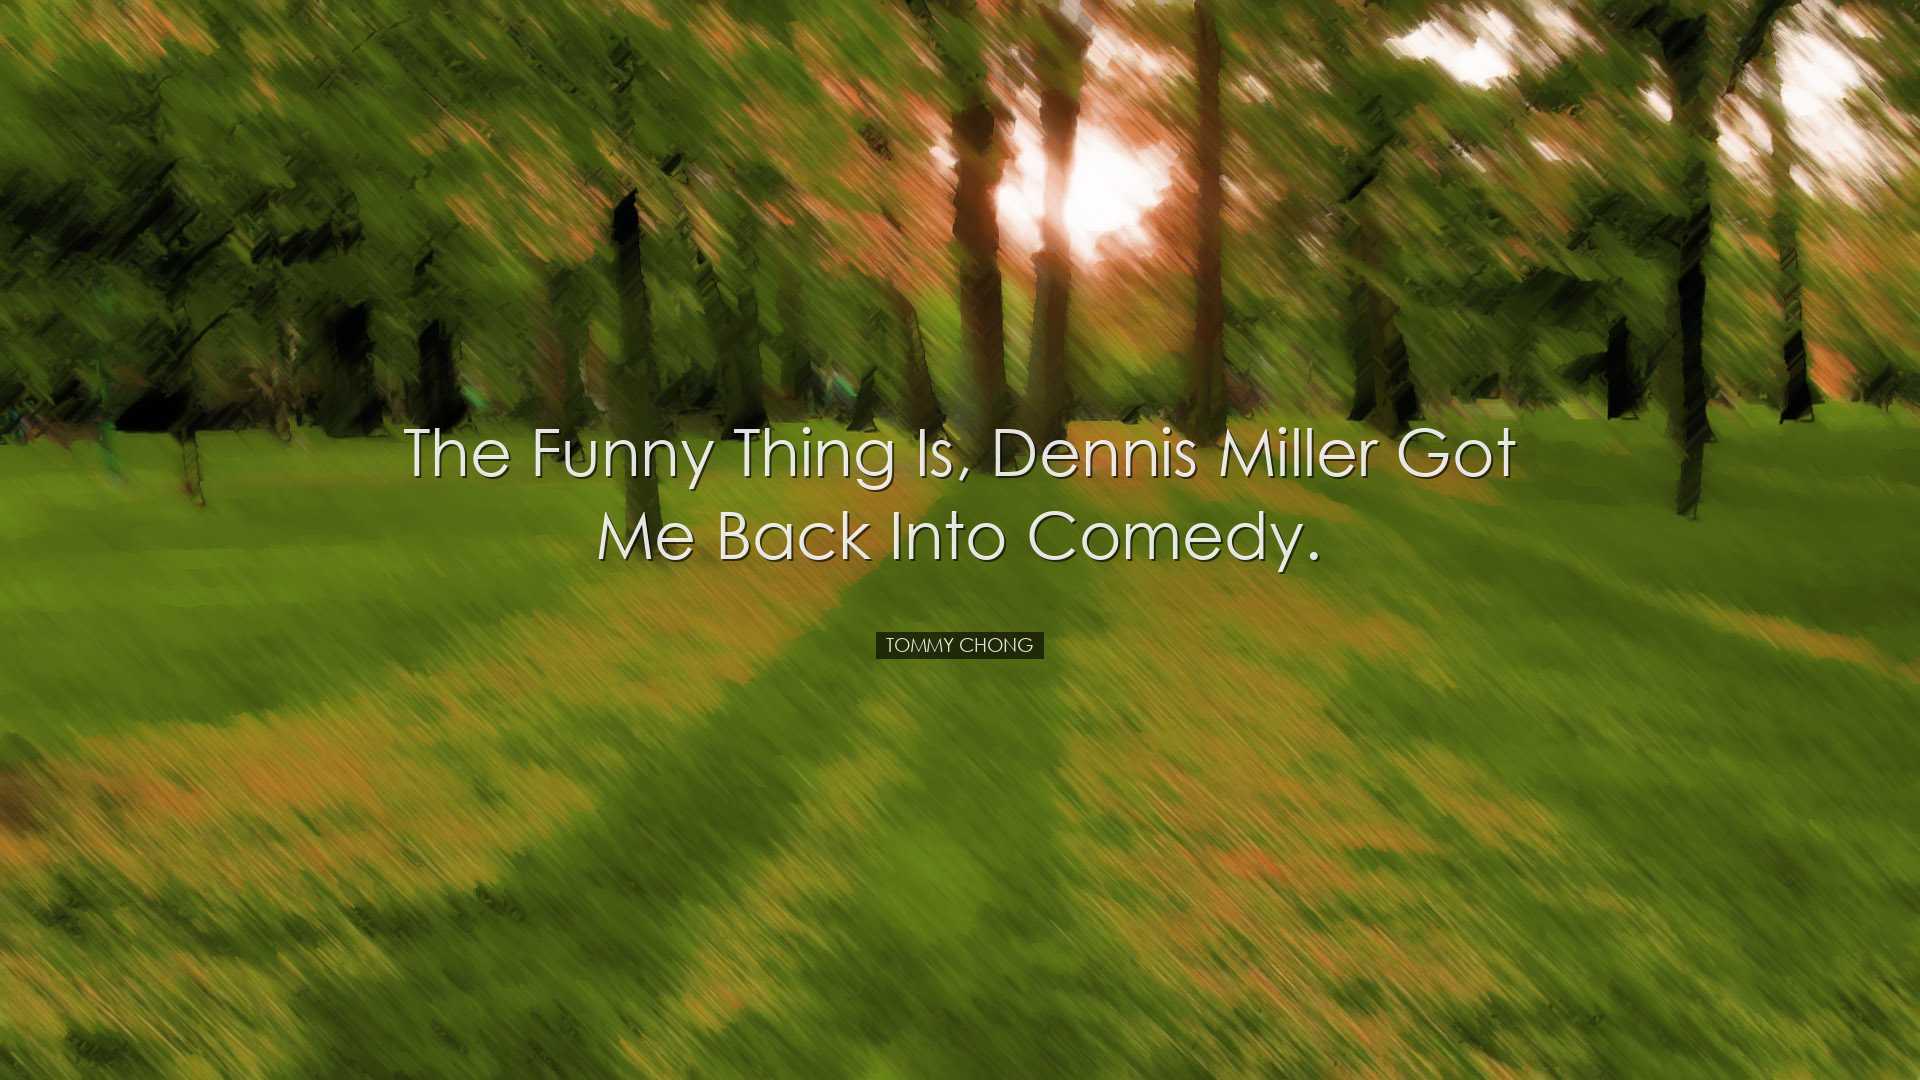 The funny thing is, Dennis Miller got me back into comedy. - Tommy